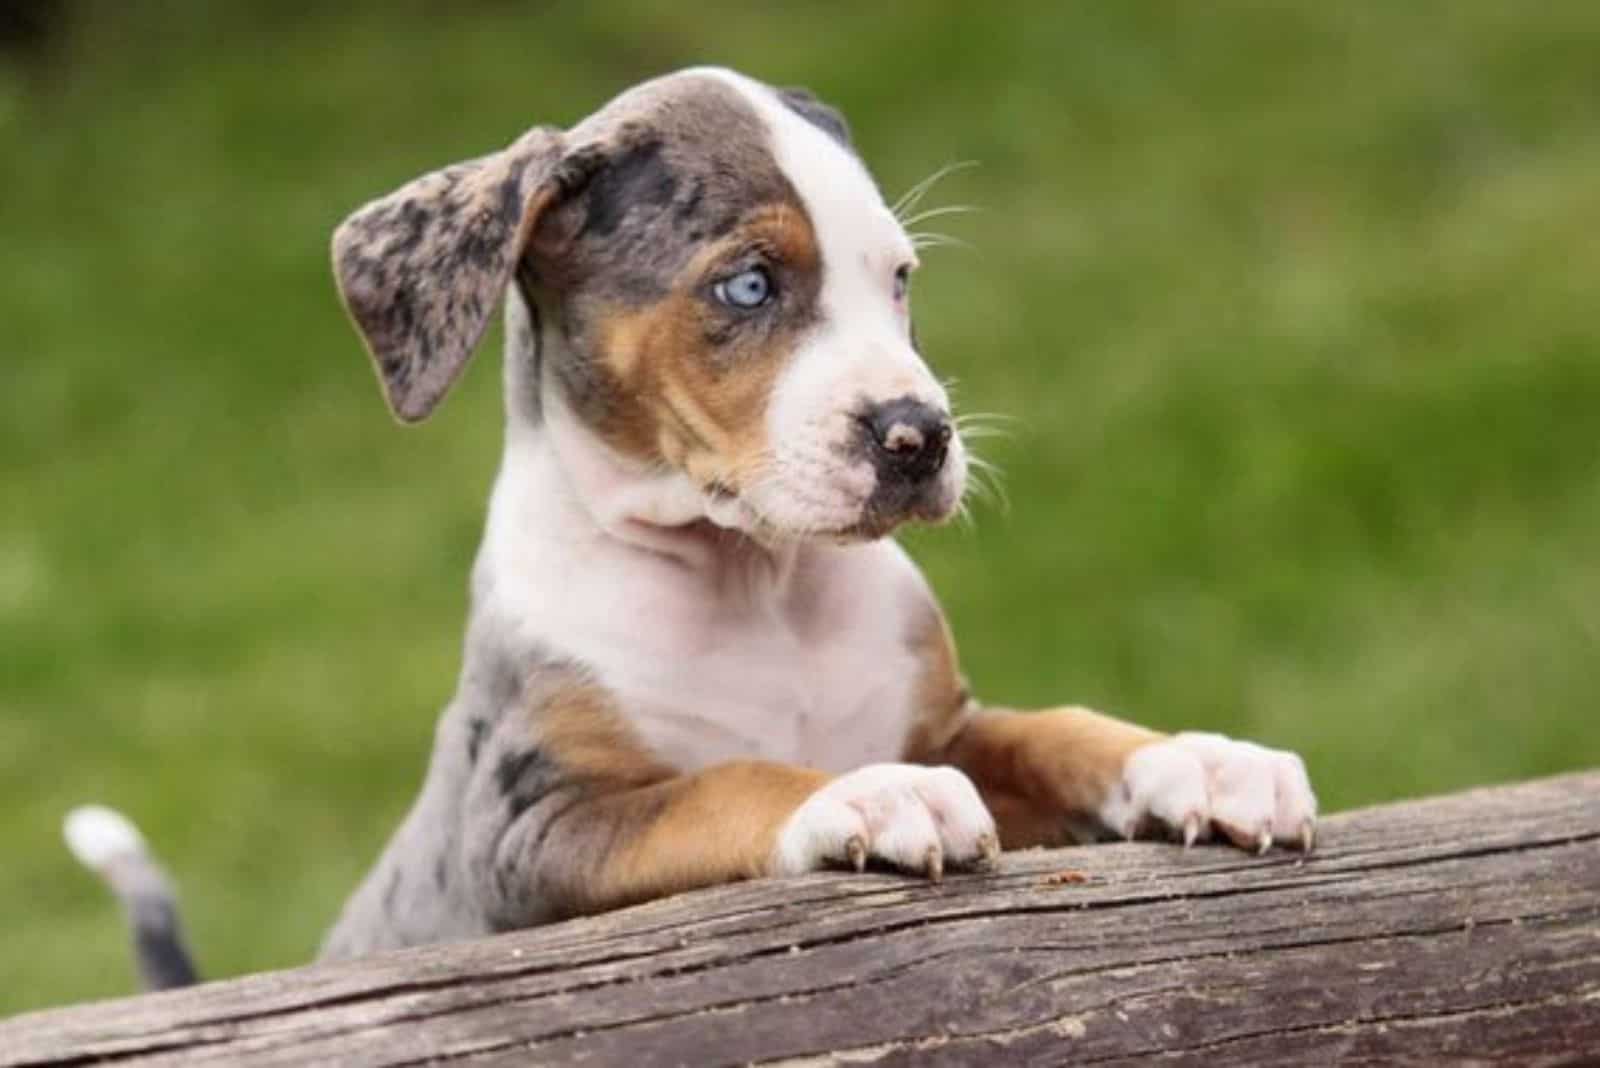 Pitahoula puppy stands by a tree and looks around